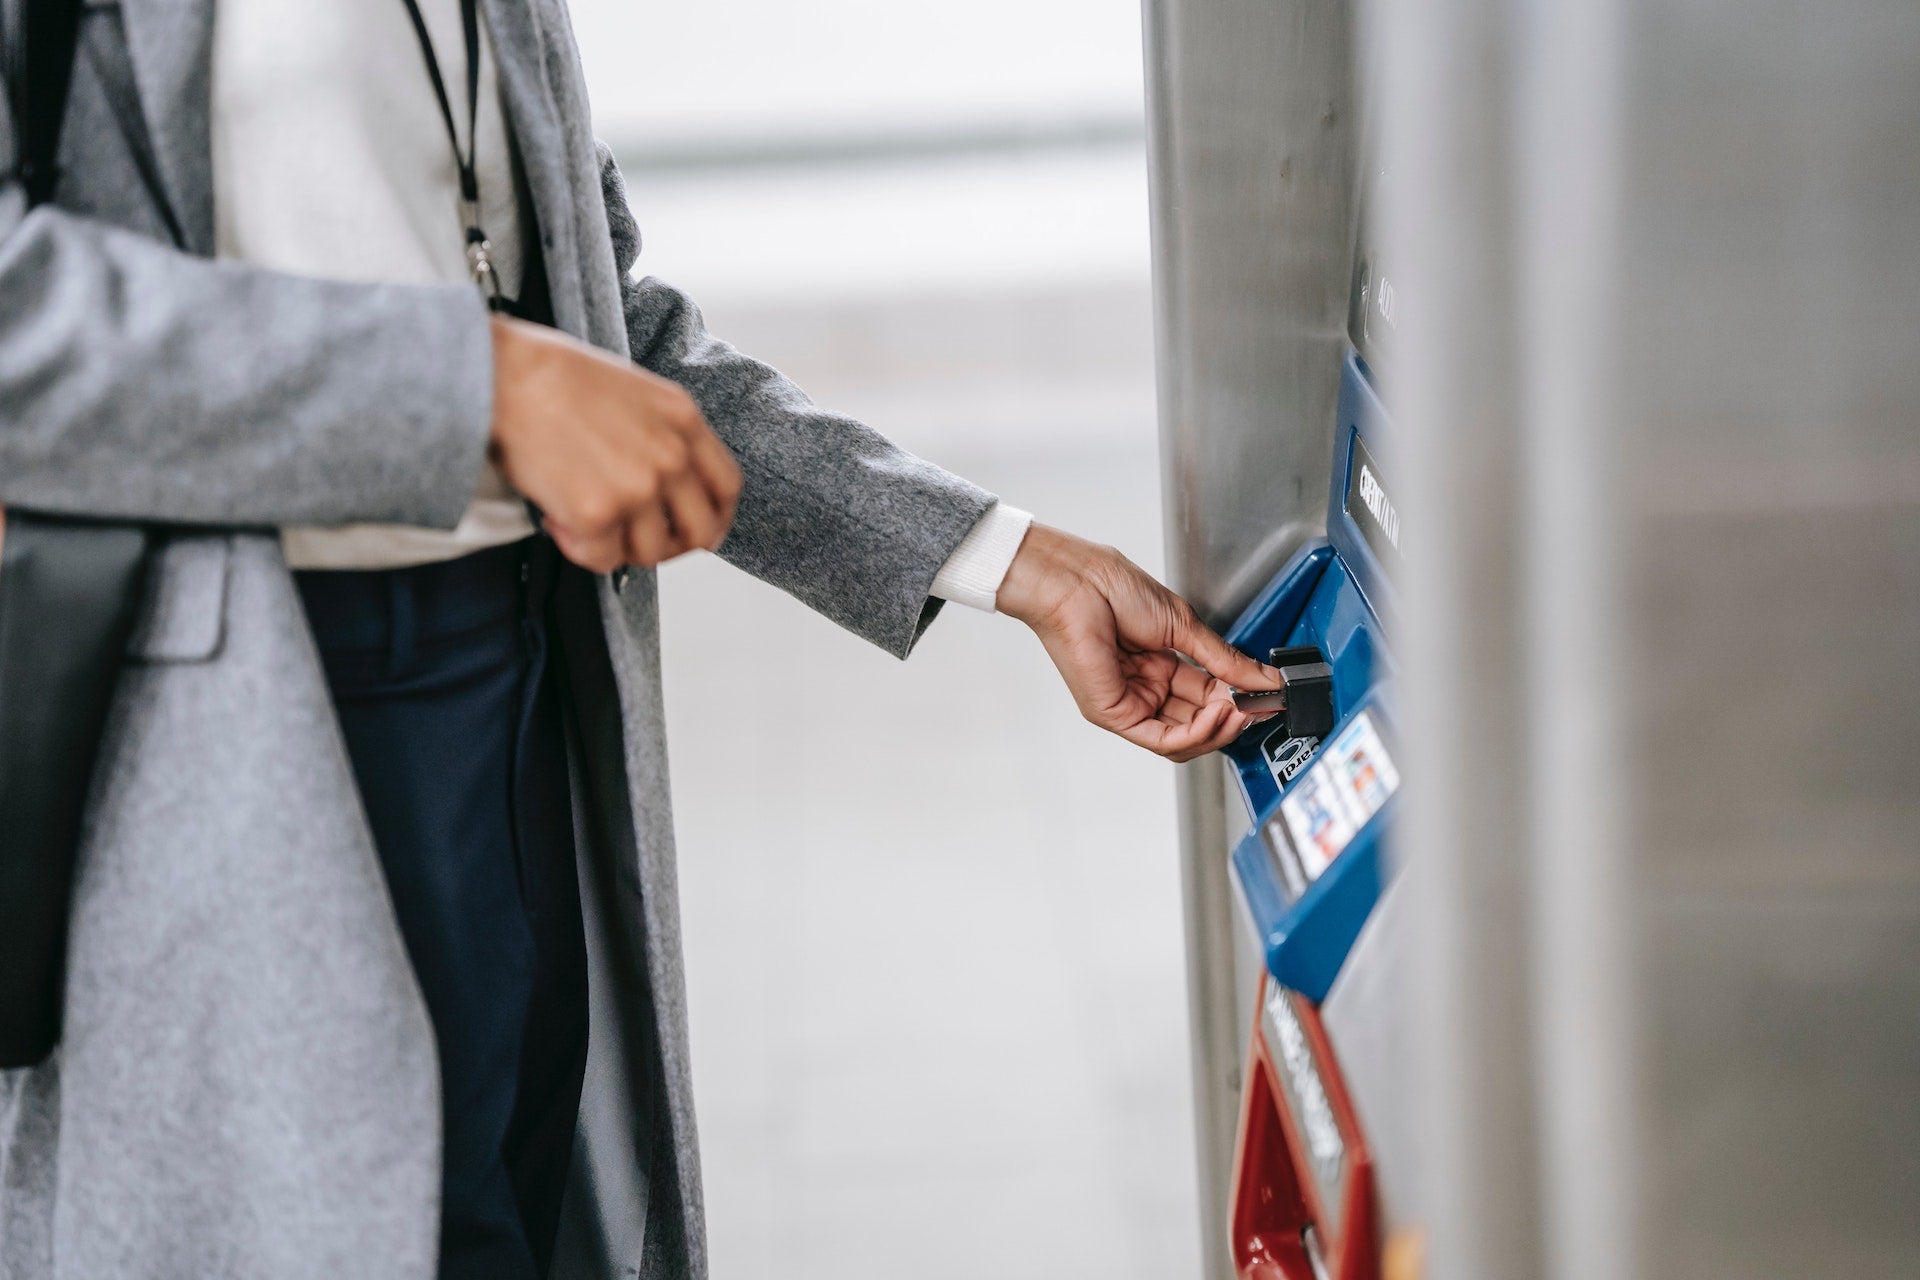 Credit Card Skimmers